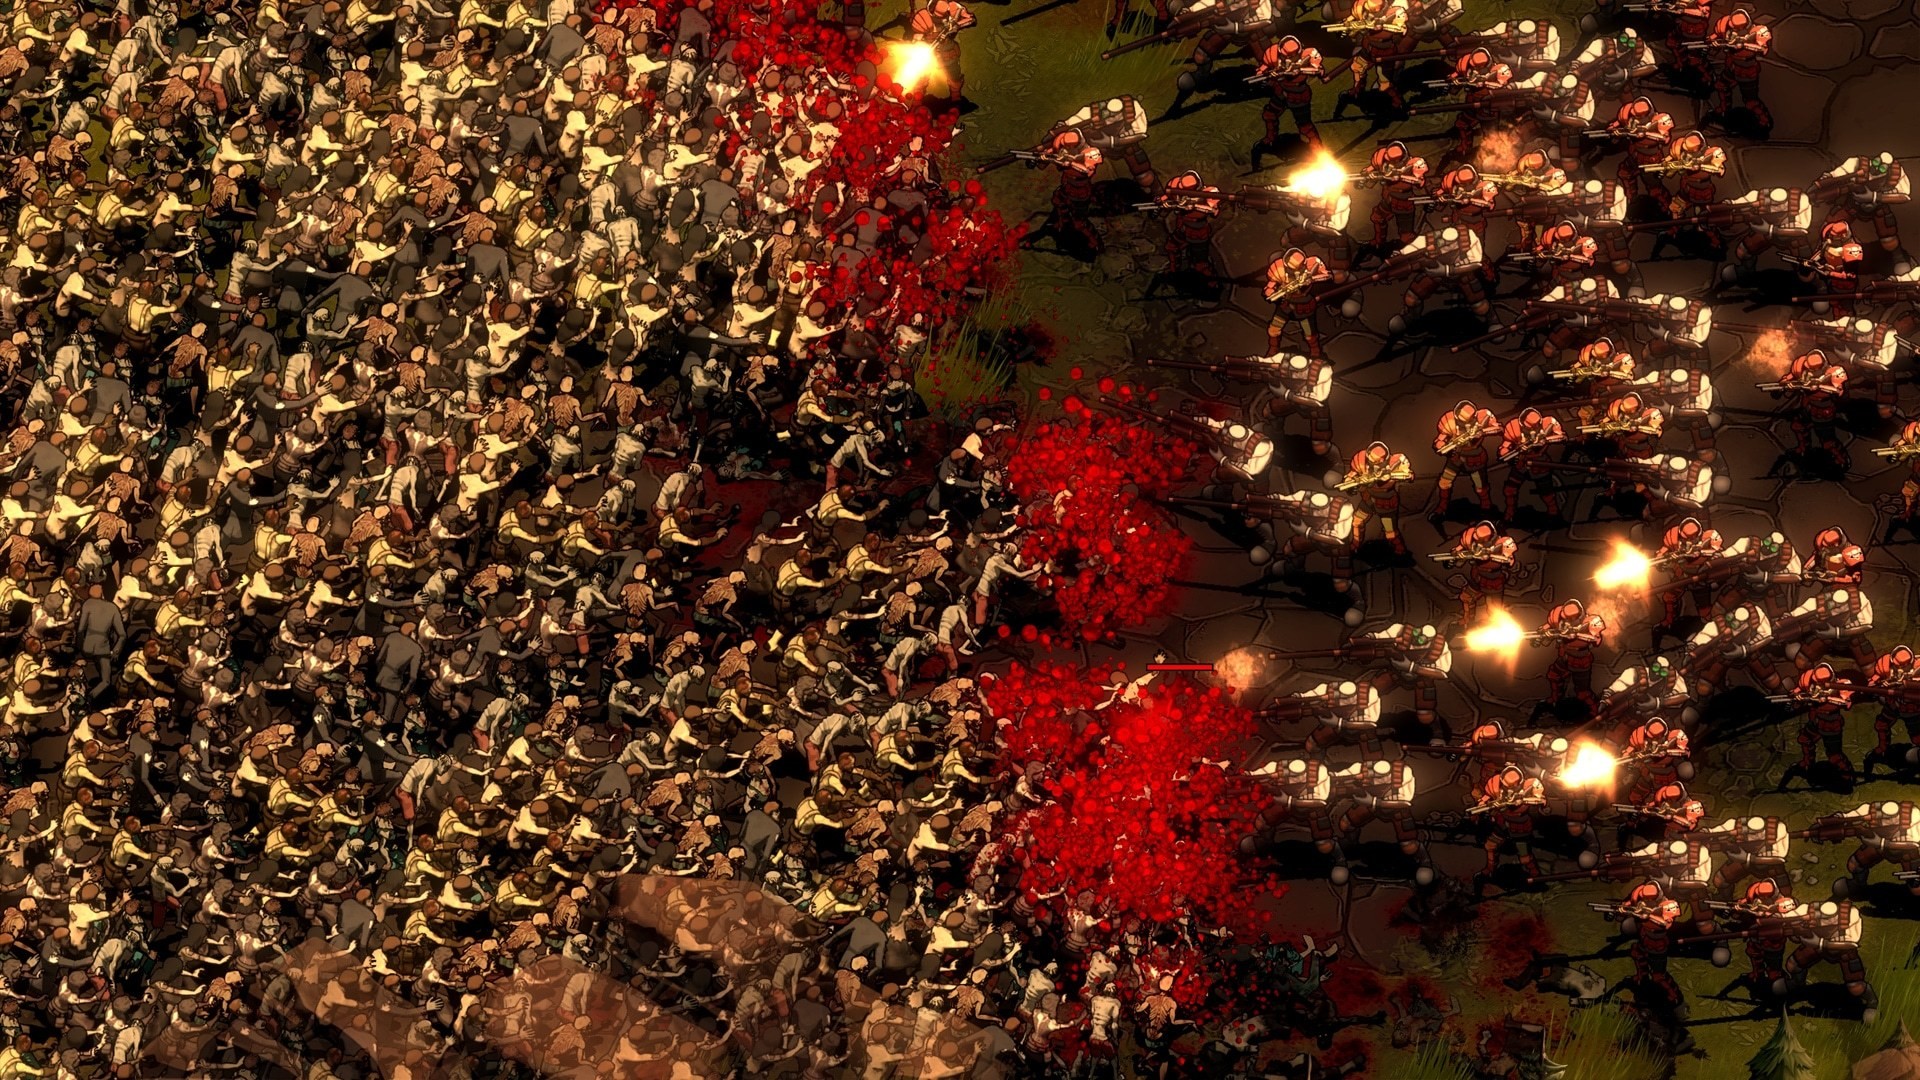 Desktop wallpaper battle video game they are billions hd image picture background bc